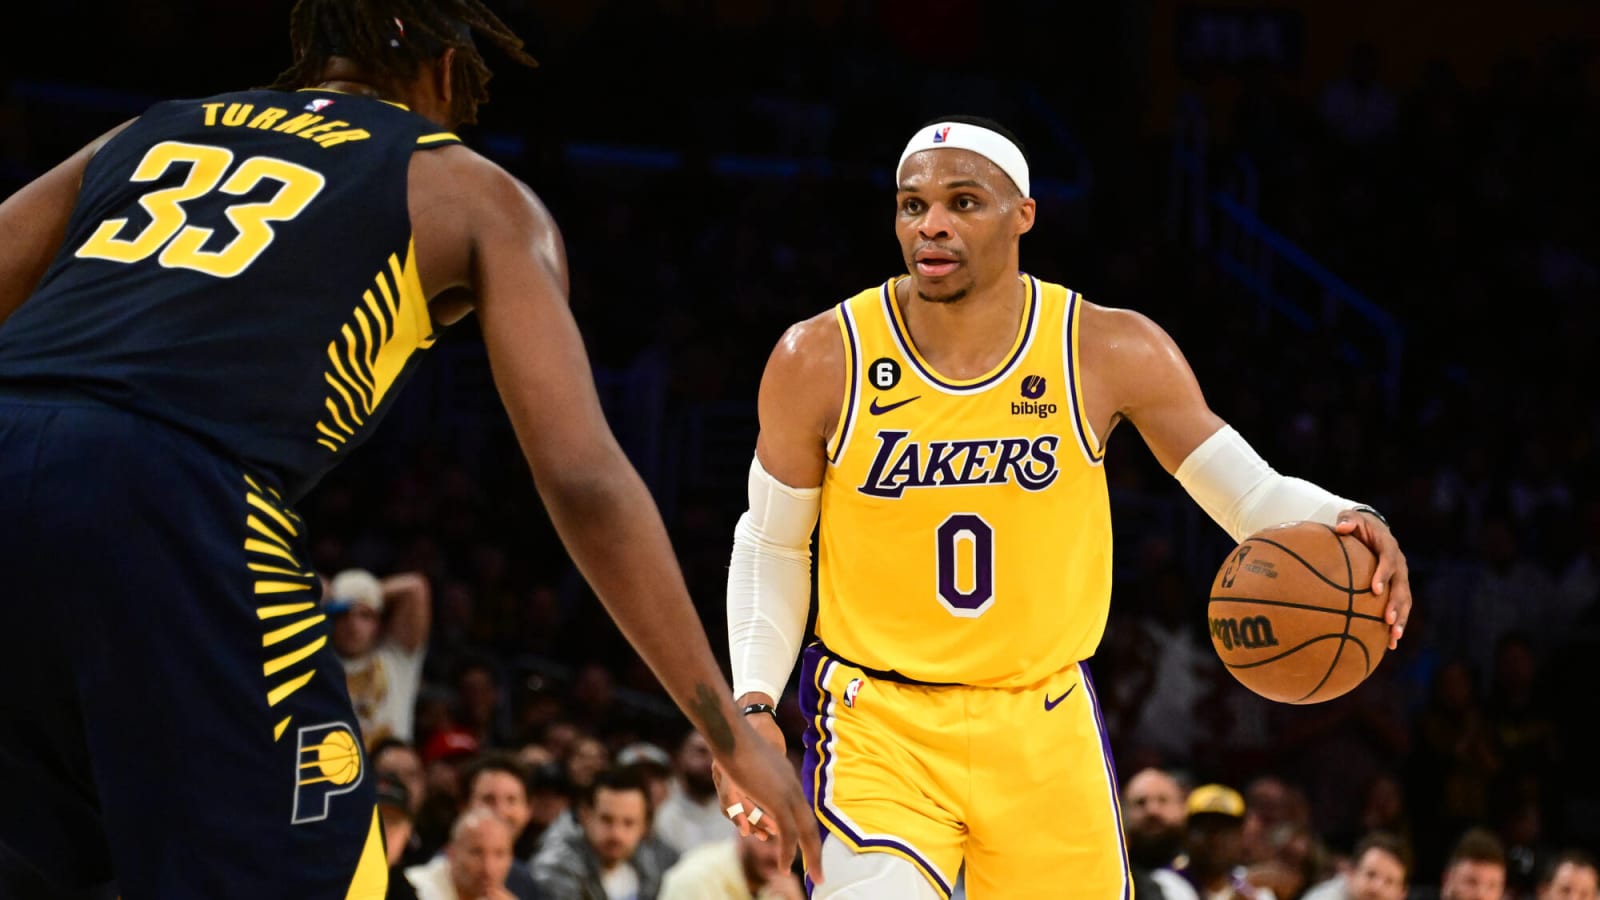 NBA Fans Can&#39;t Believe The Lakers Let Go 6 Quality Players For Almost Nothing: "This Is Mad"